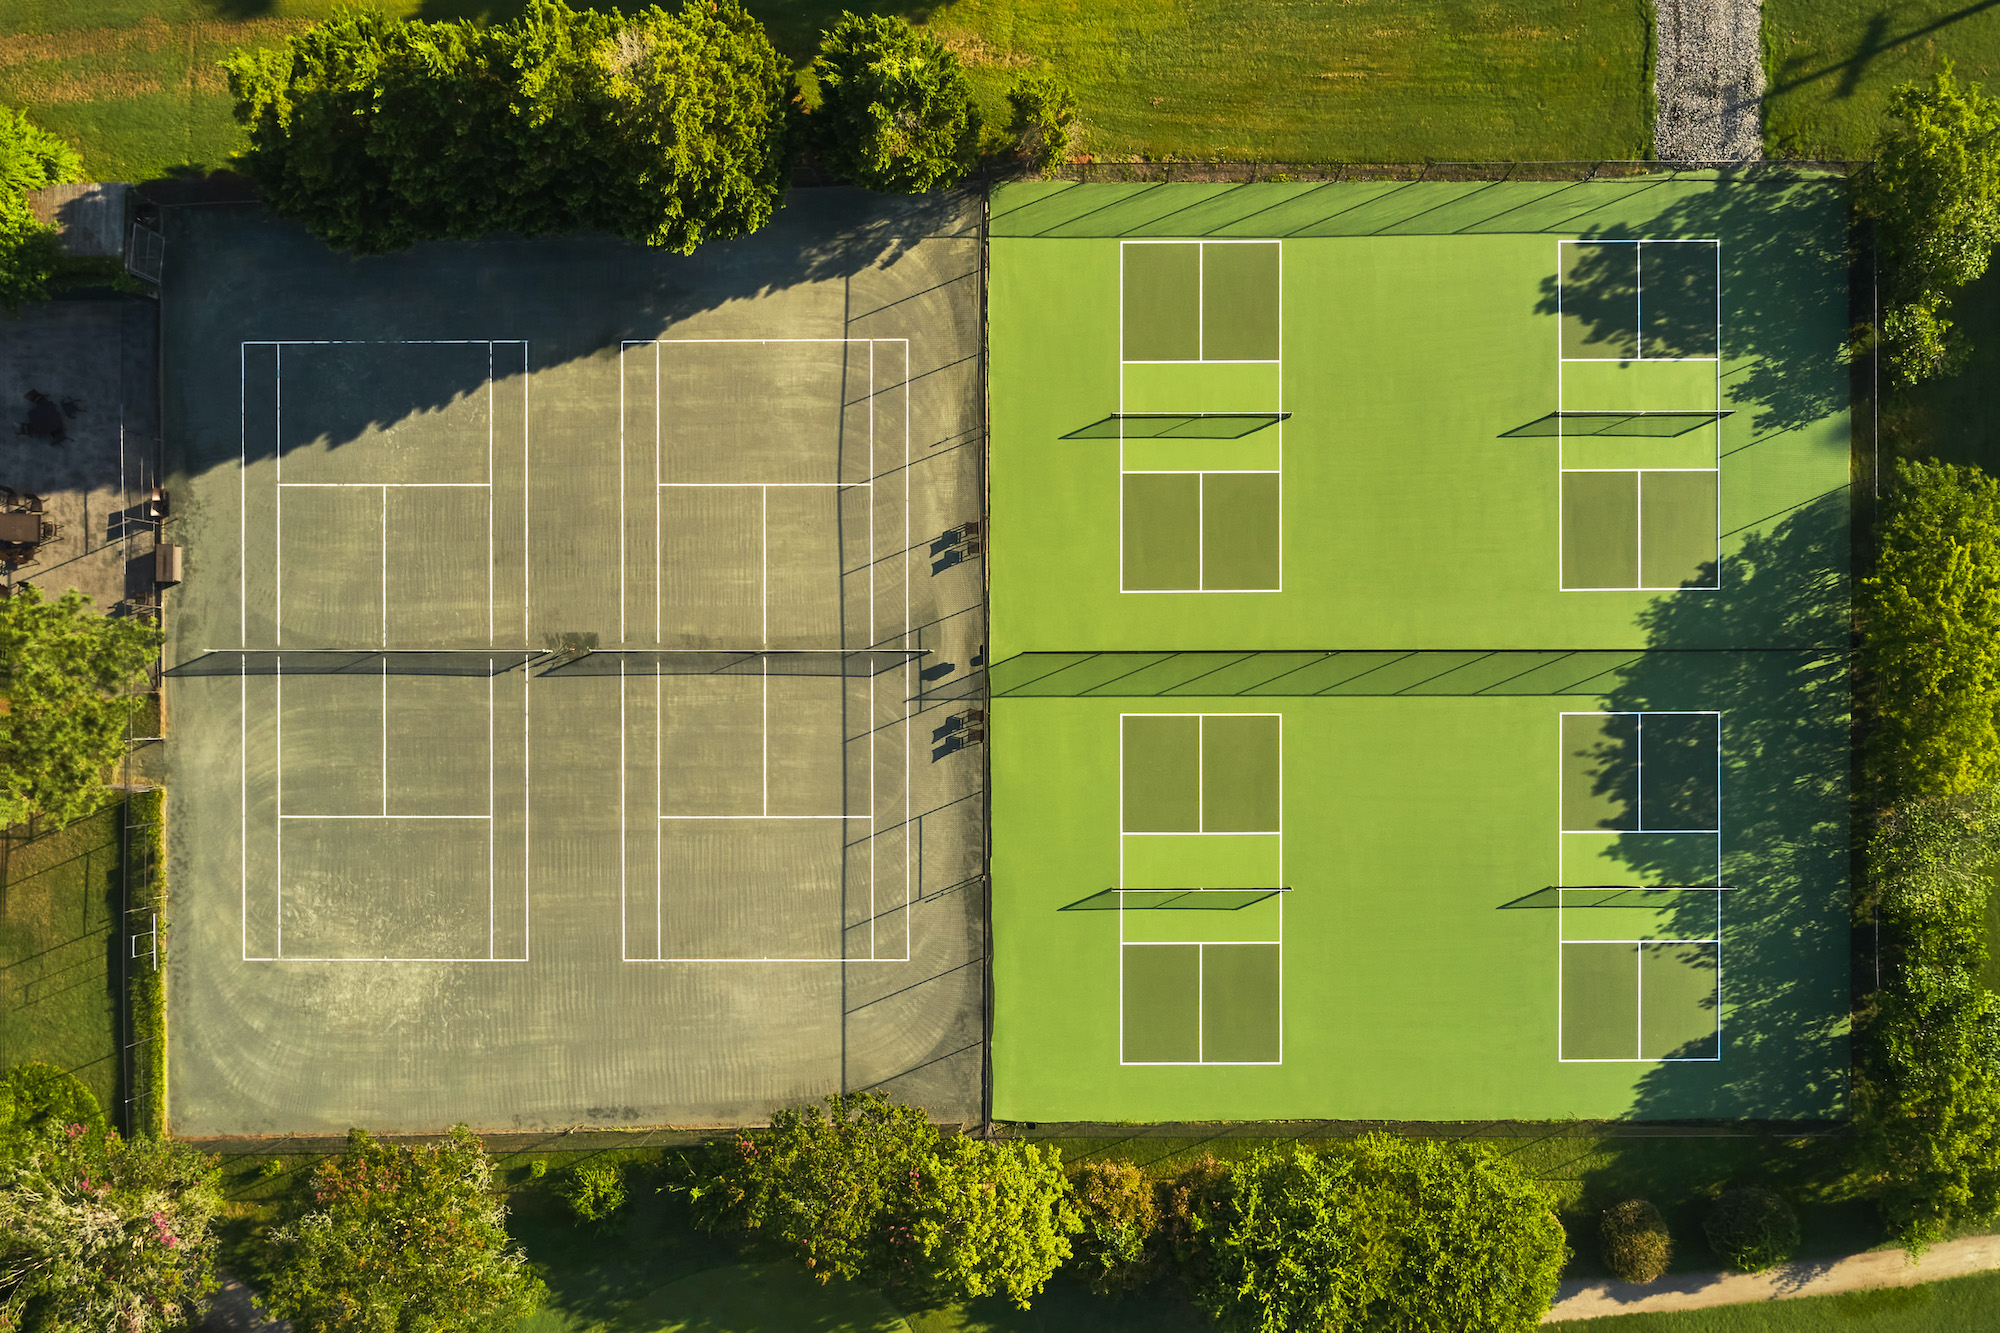 Tennis and Pickleball courts at the Tides Inn